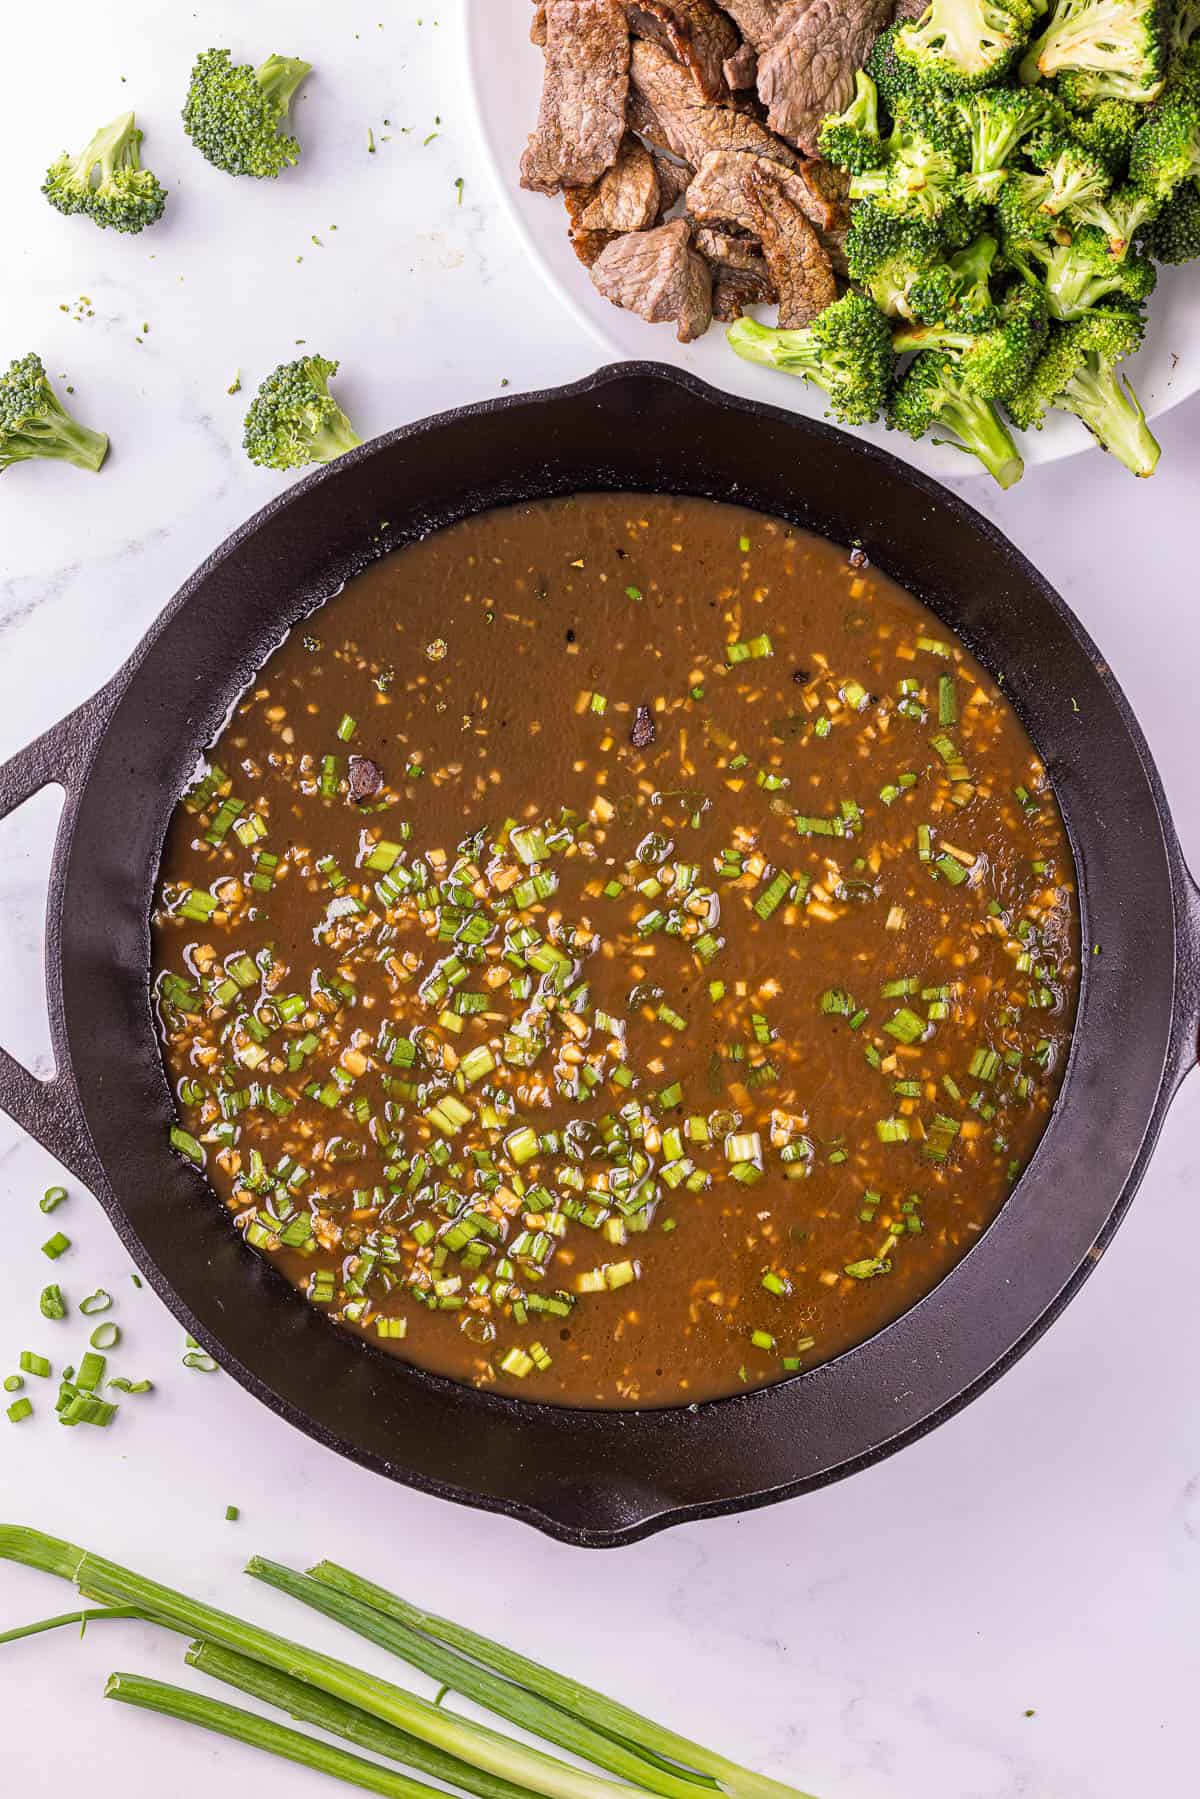 Thickening sauce in pan for Easy beef broccoli one pan meal.